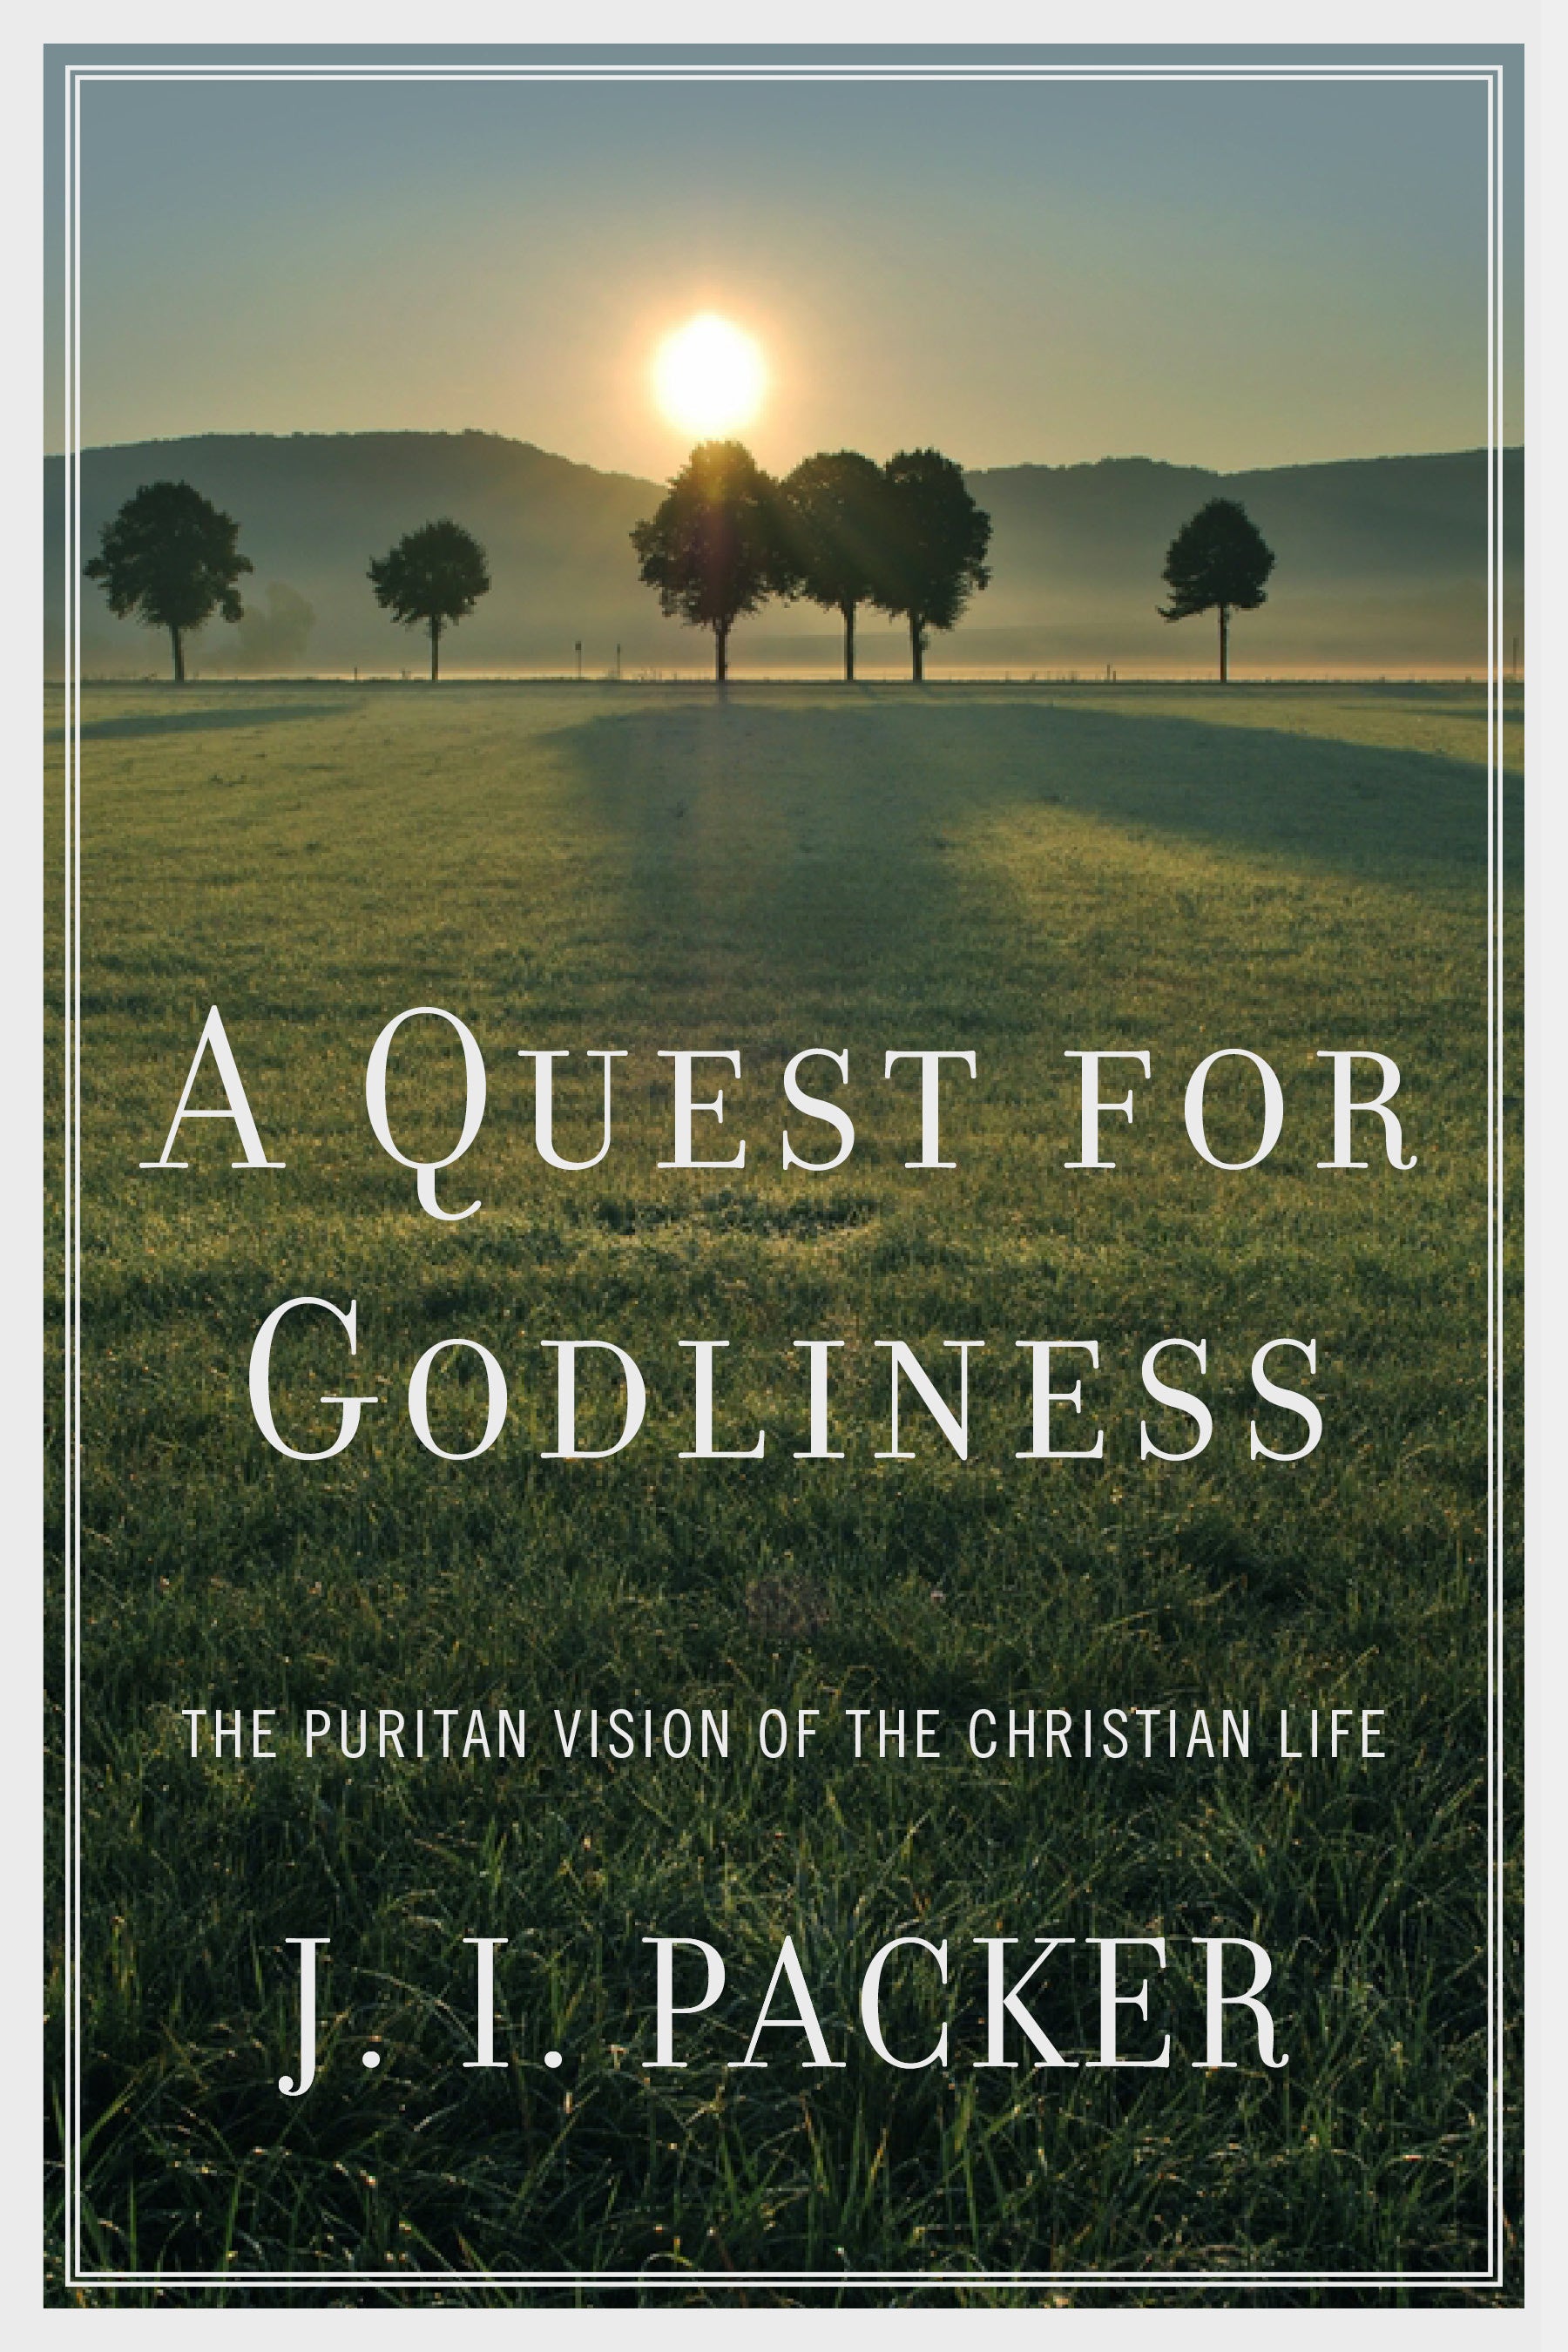 Image of Quest For Godliness other